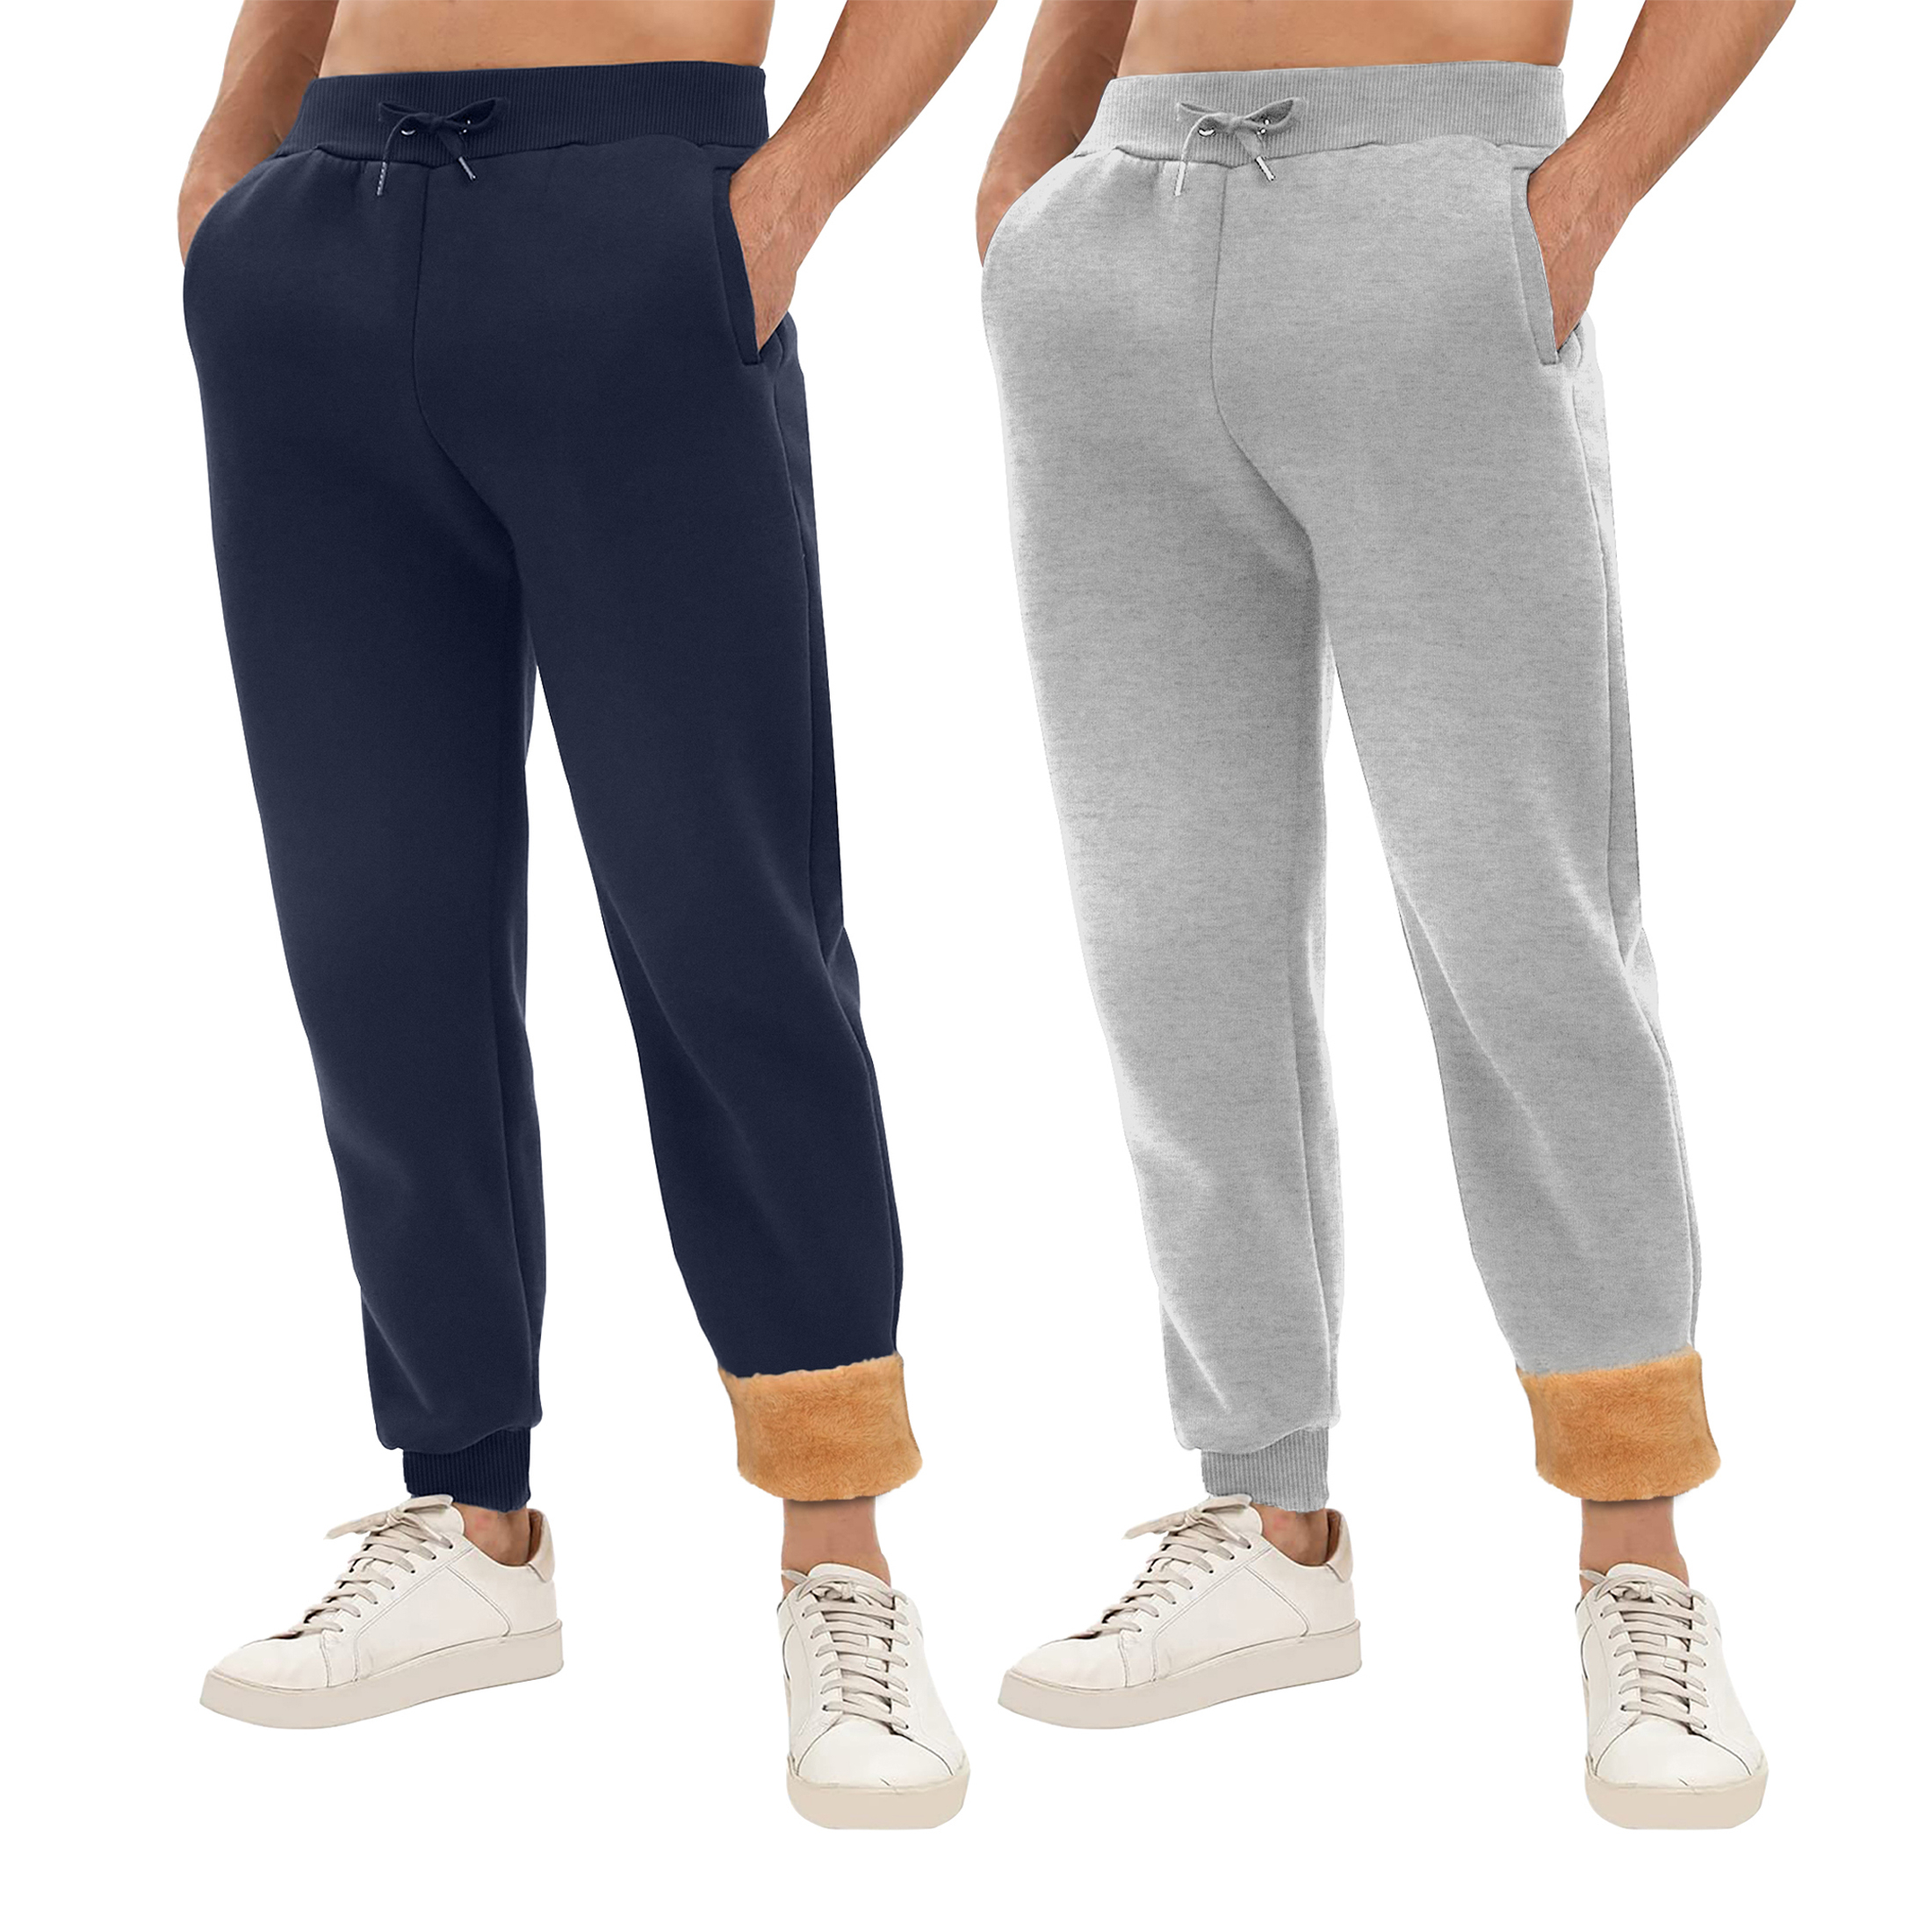 2-Pack: Men's Winter Warm Thick Sherpa Lined Jogger Track Pants With Pockets - Navy & Grey, Small